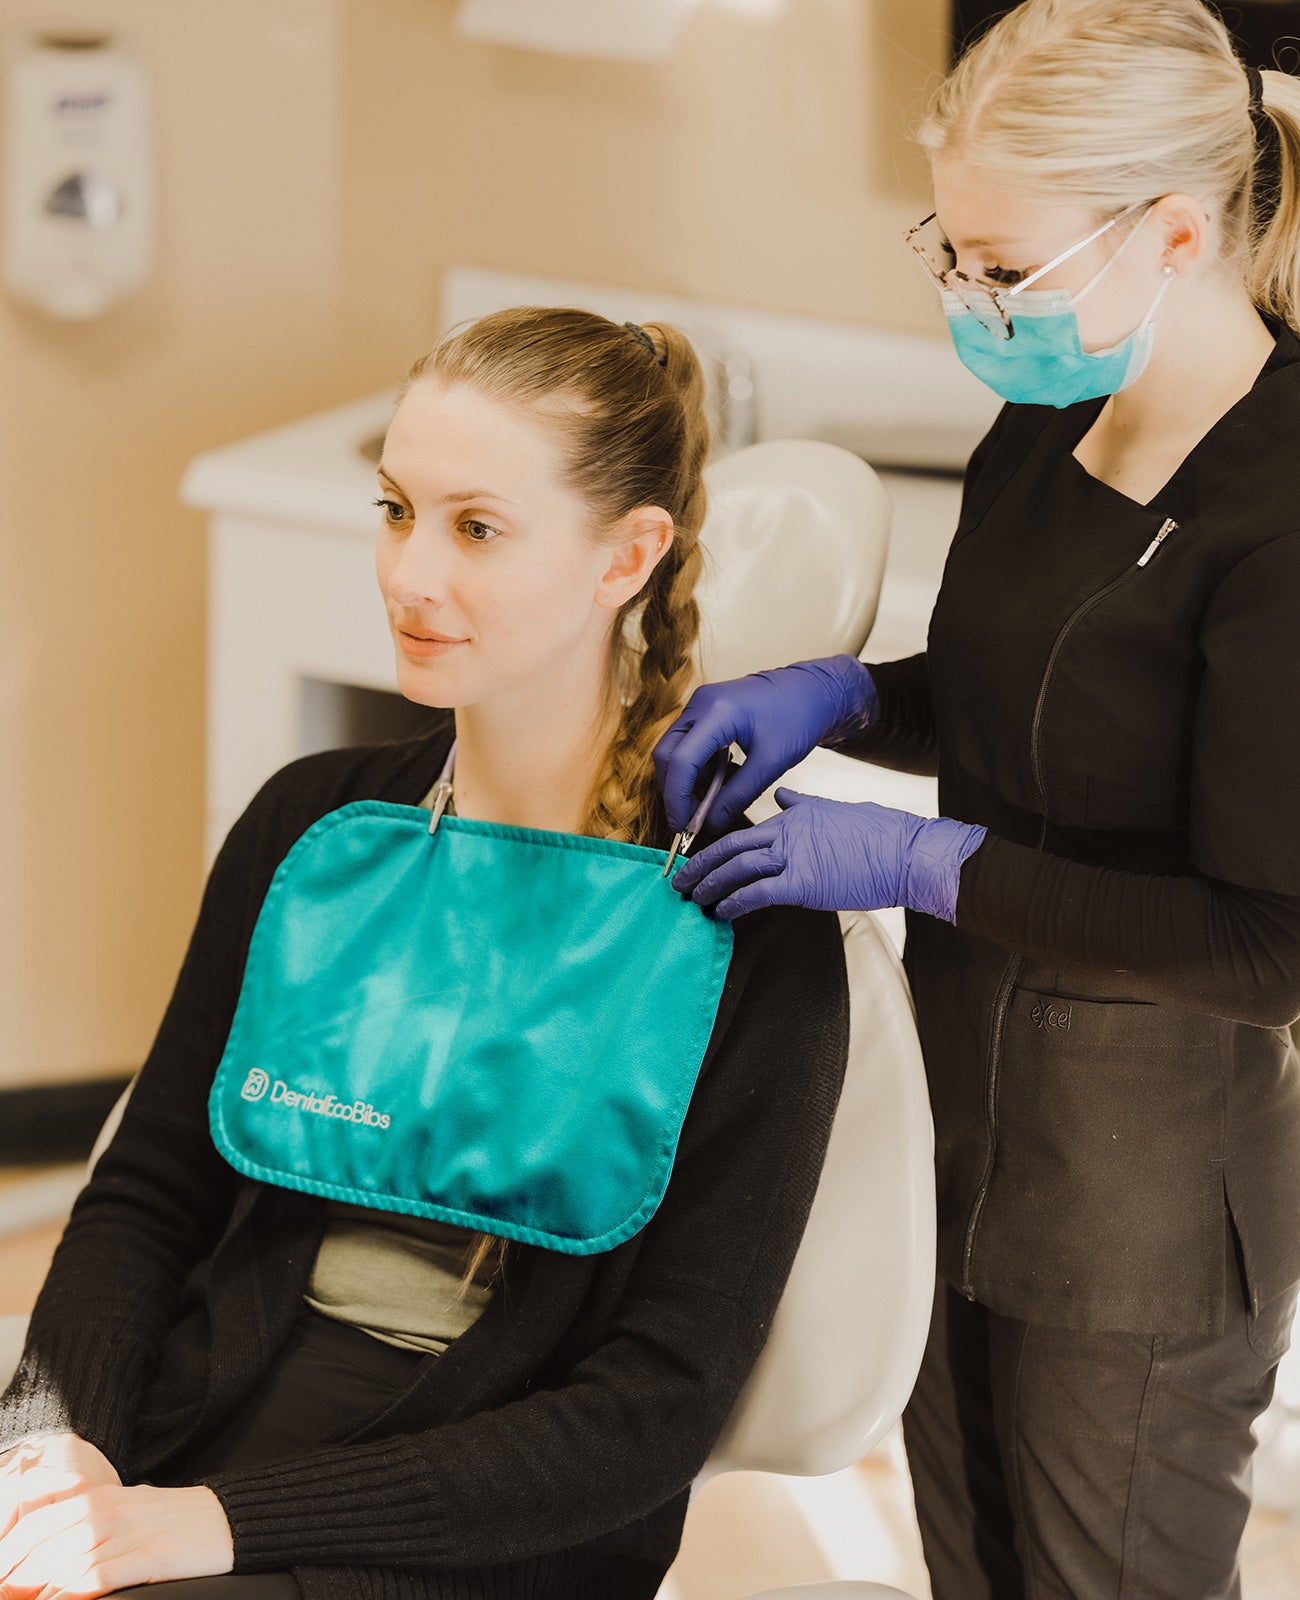 A young woman wearing a mask and gloves fastens a reusable dental bib around another young woman's neck.